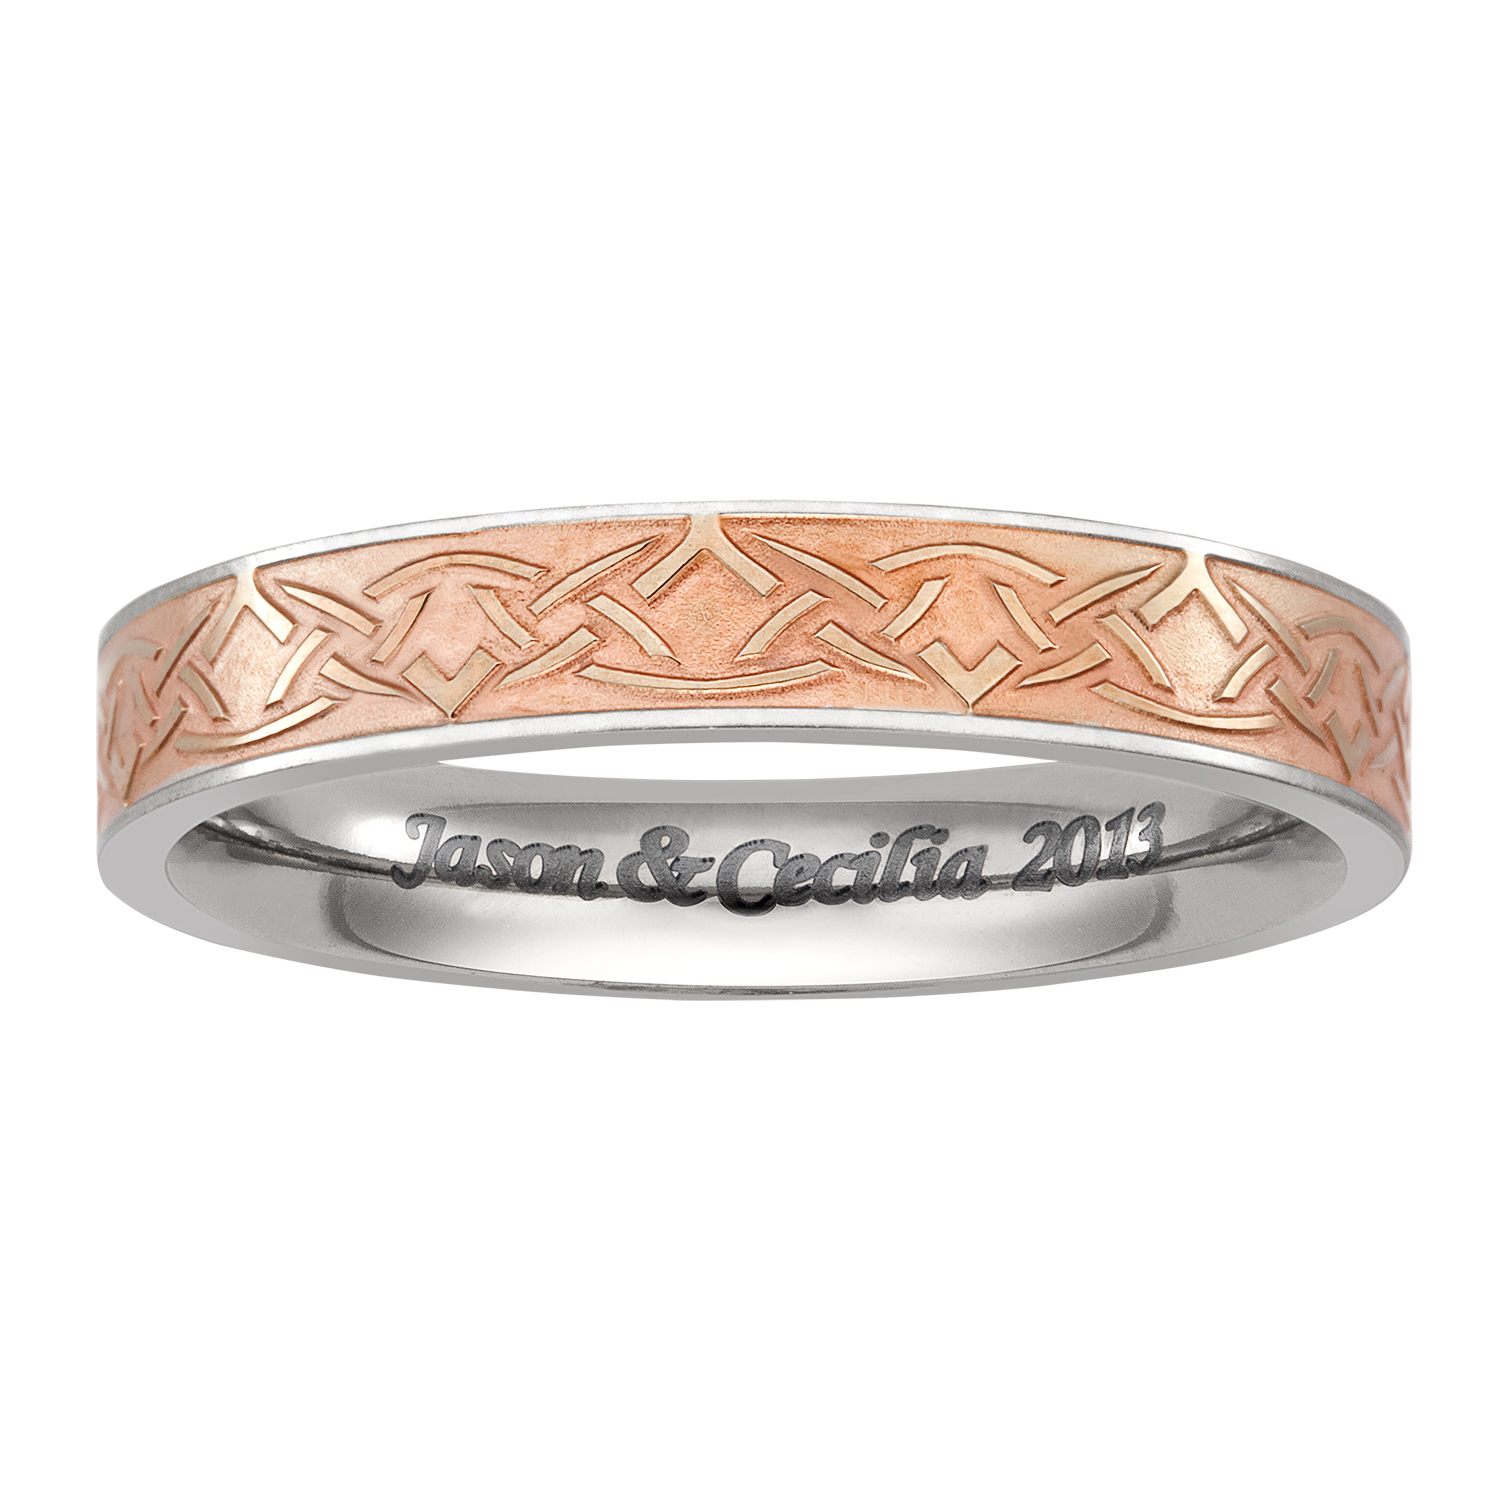 Women's Titanium and Rose Gold Celtic Knot Wedding Band